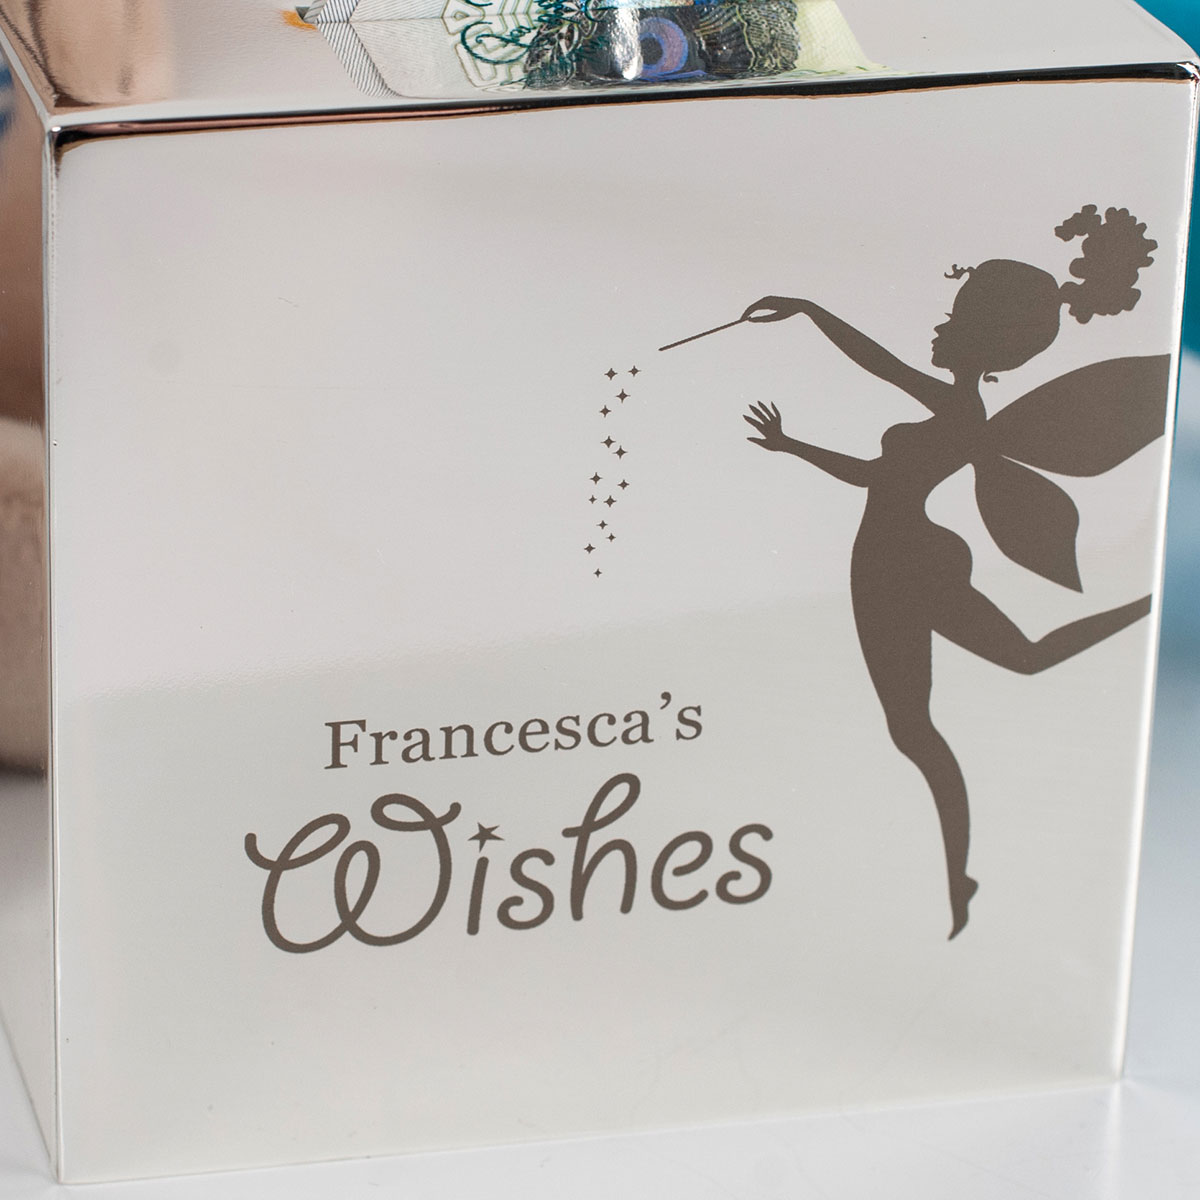 Personalised Engraved Silver Plated Money Box - Fairy Wishes